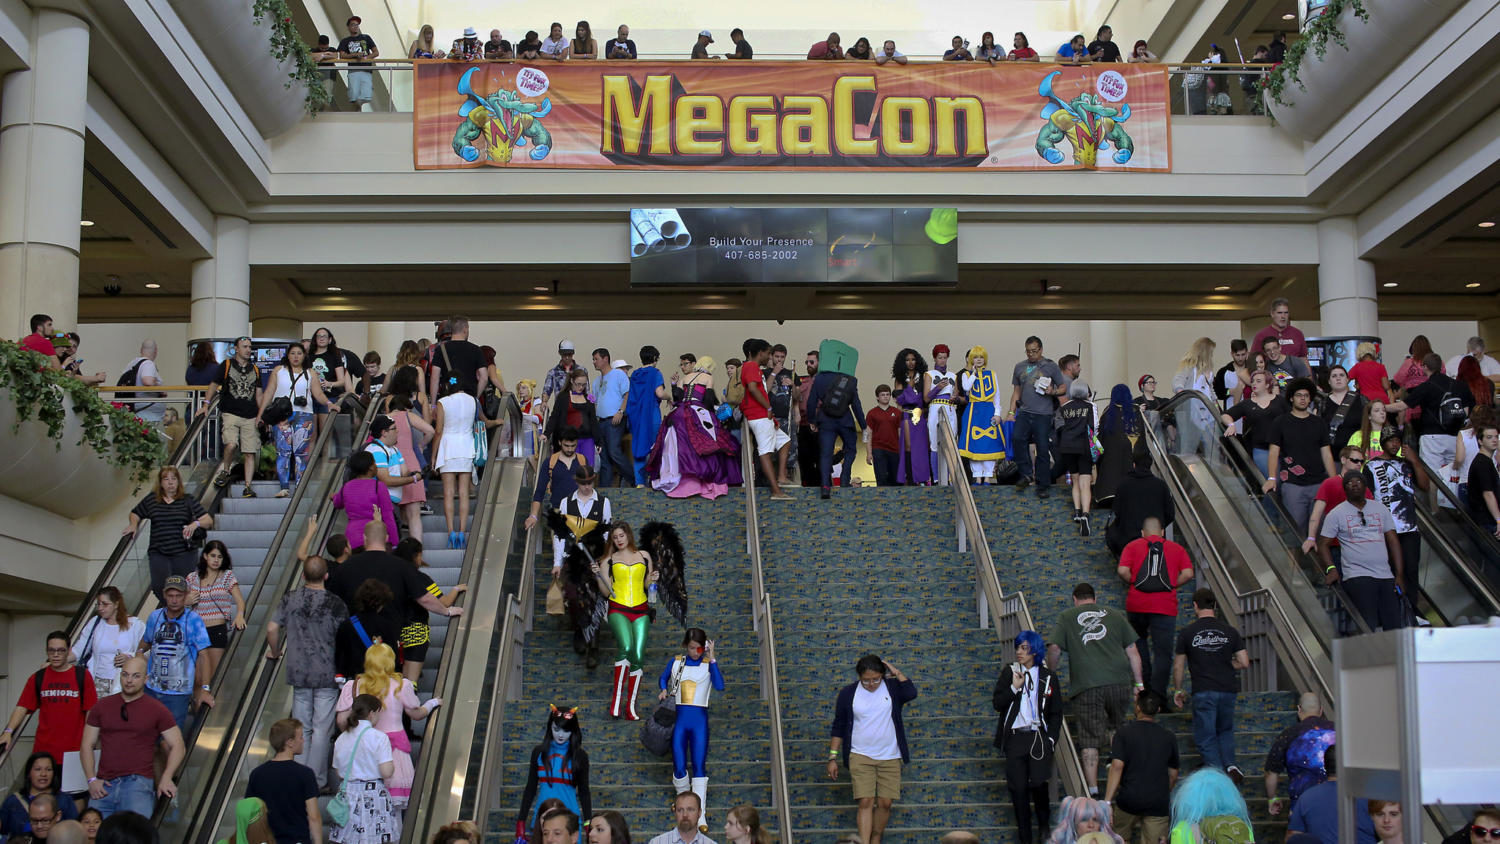 Megacon+will+be+arriving+to+the+Orange+County+Convention+Center+on+May+25th+and+will+end+on+May+28th.